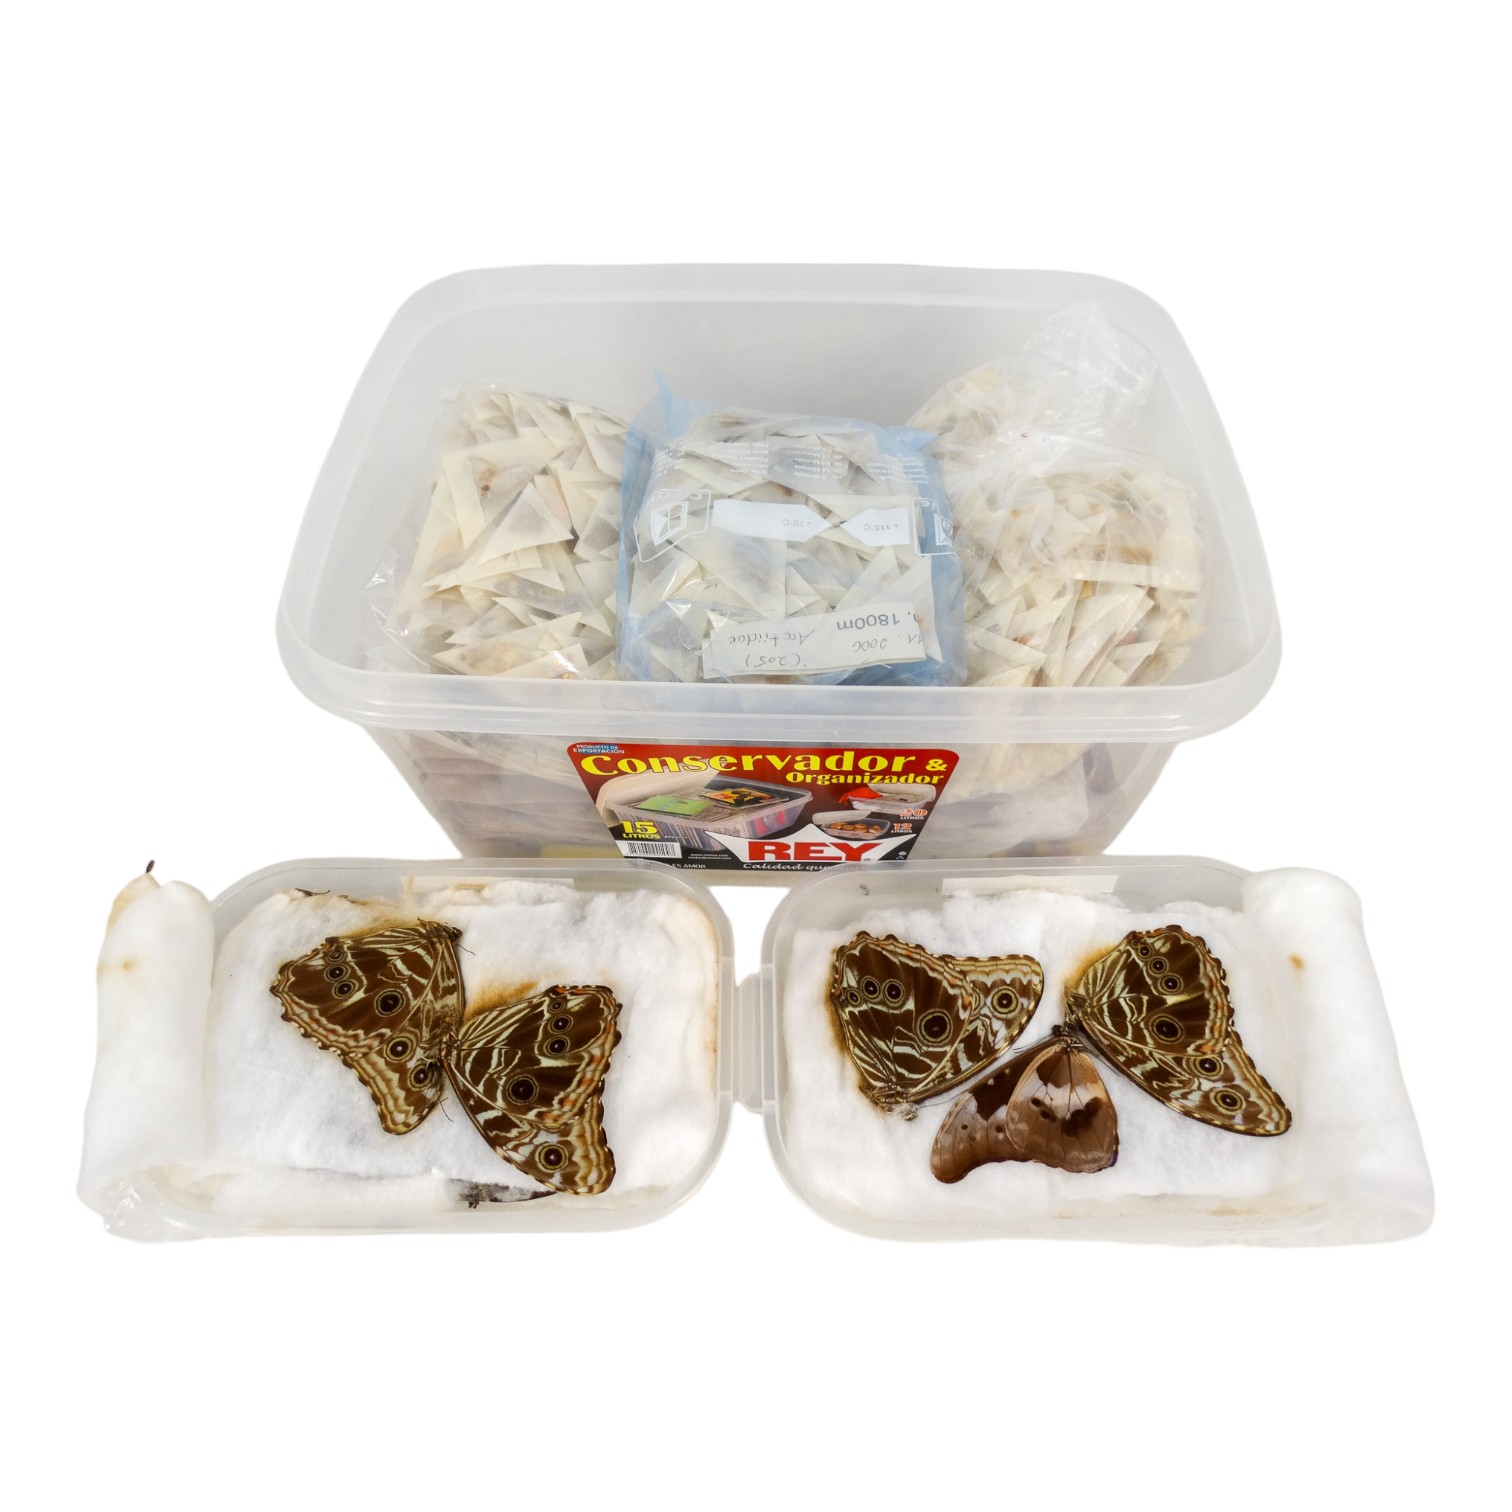 A box of mixed papered butterflies - mostly Indonesia